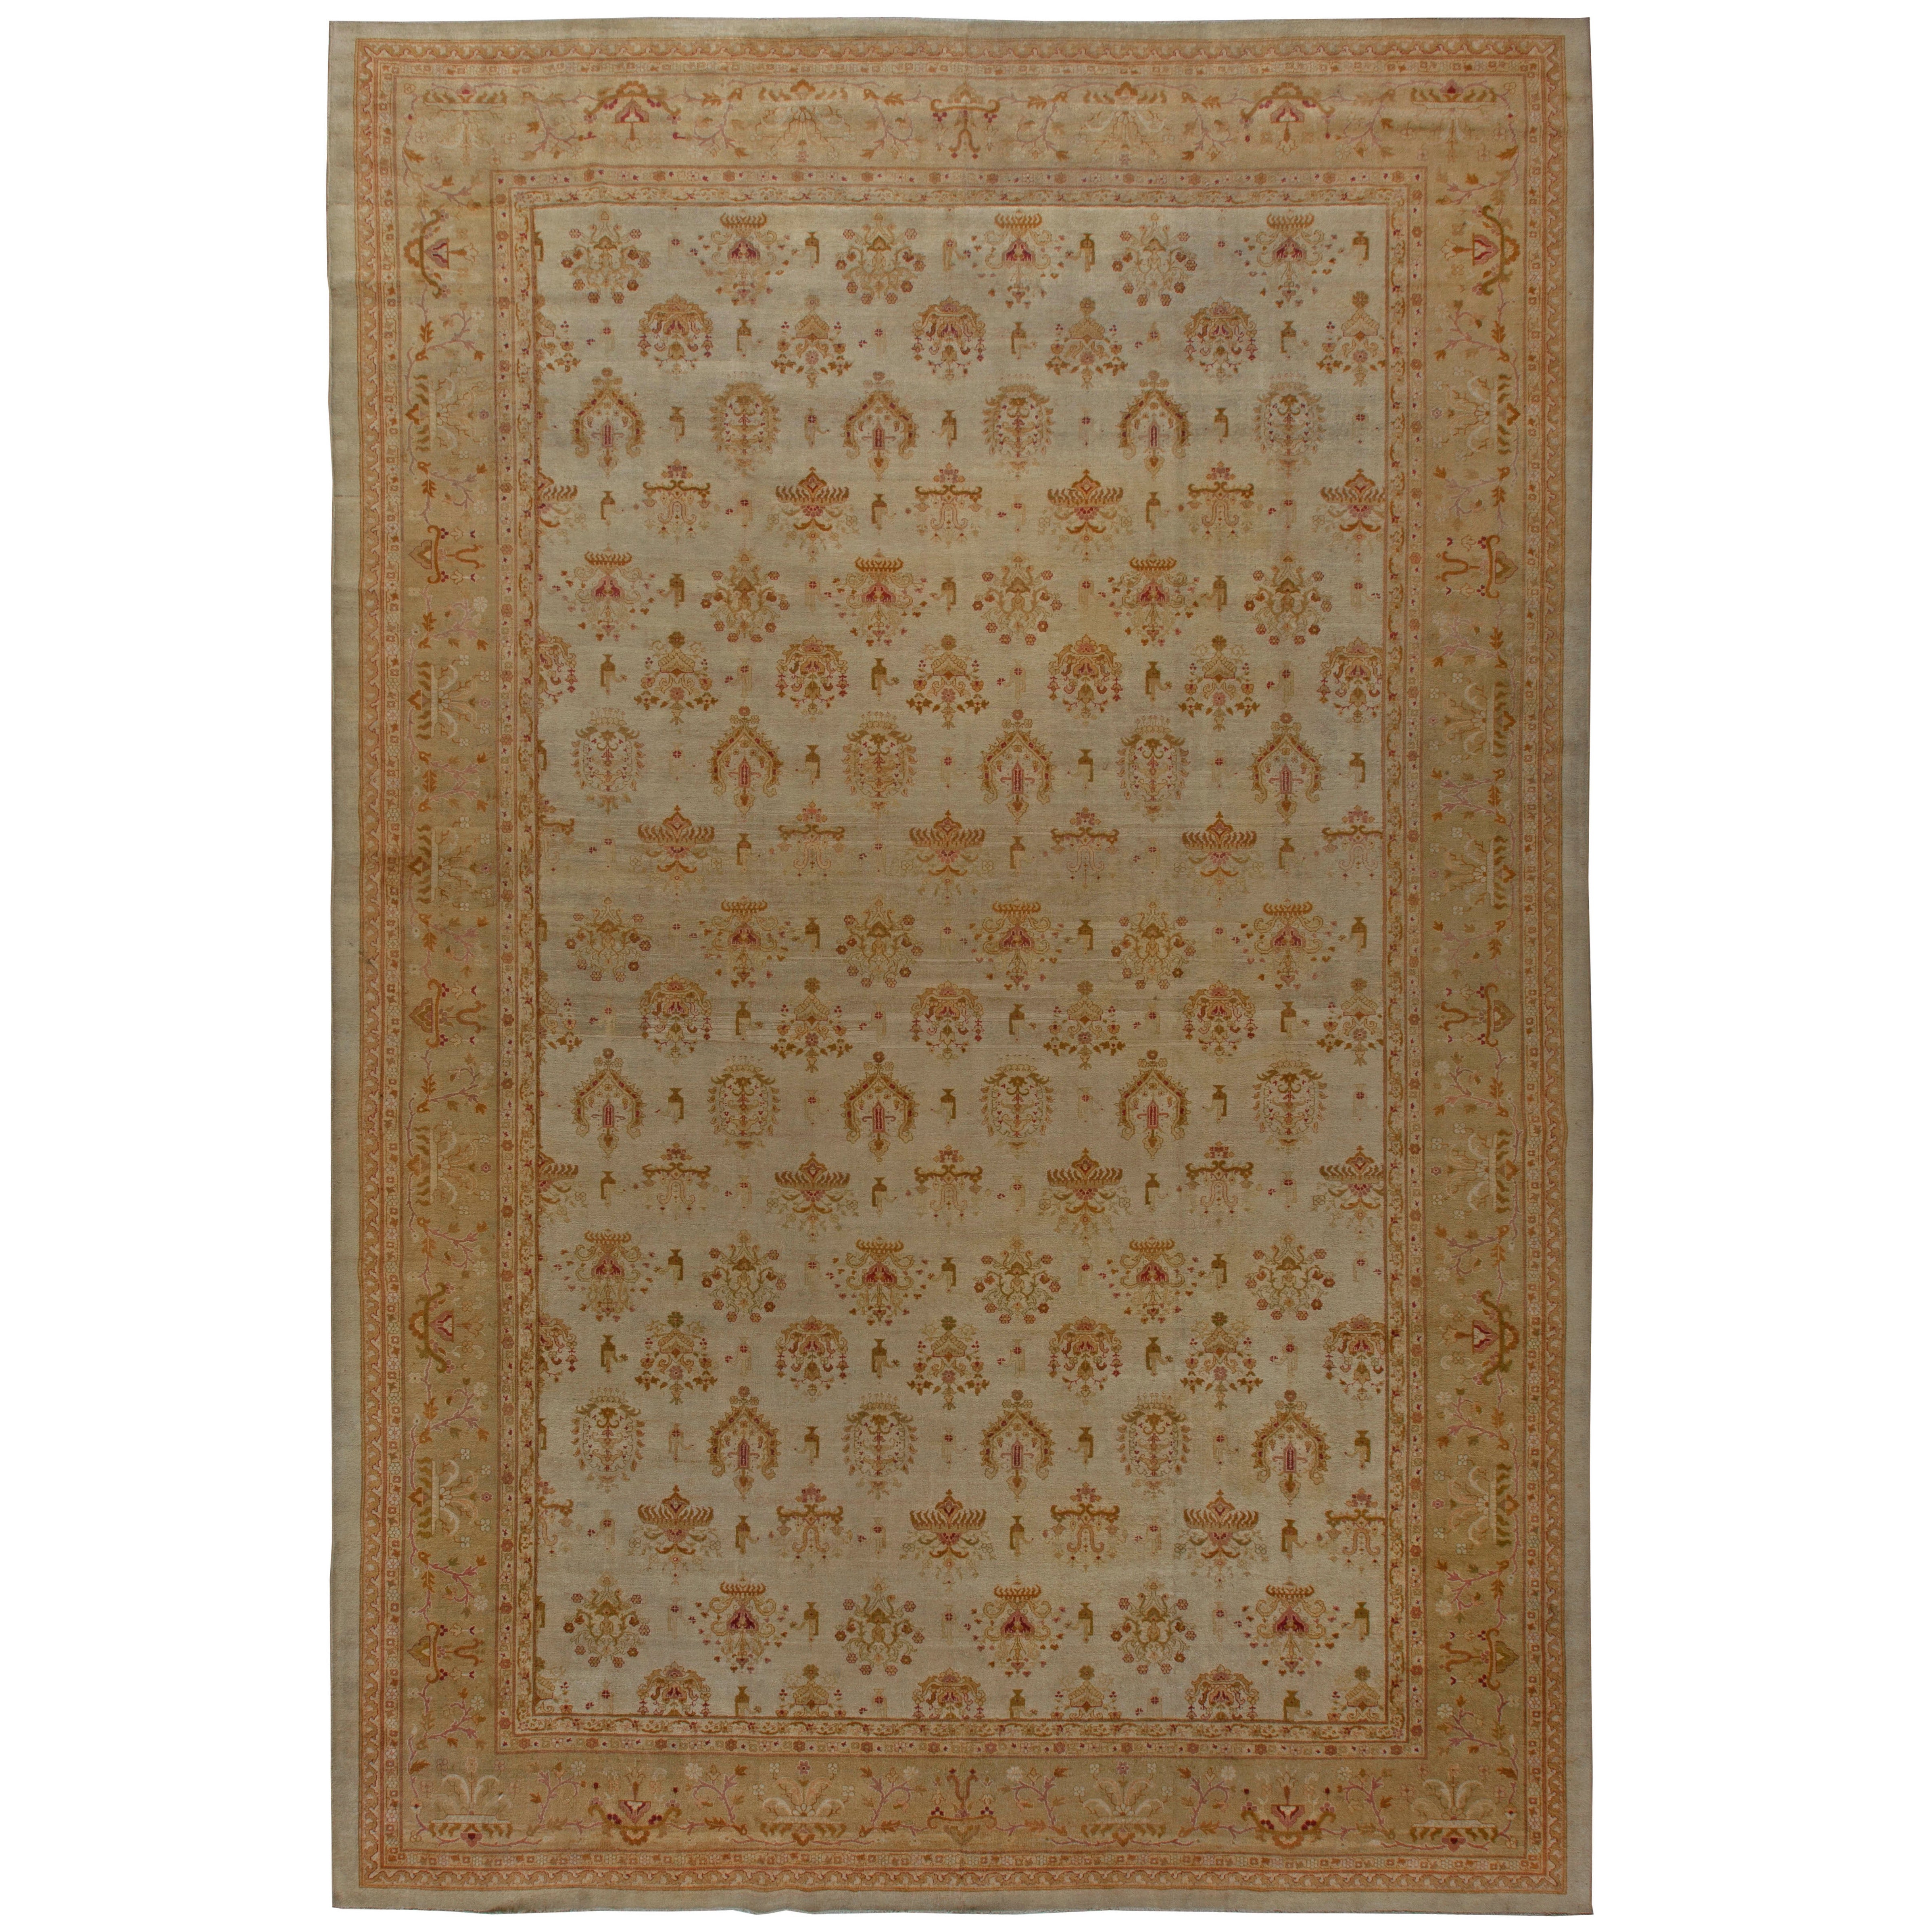 Authentic Indian Amritsar Handmade Wool Carpet For Sale